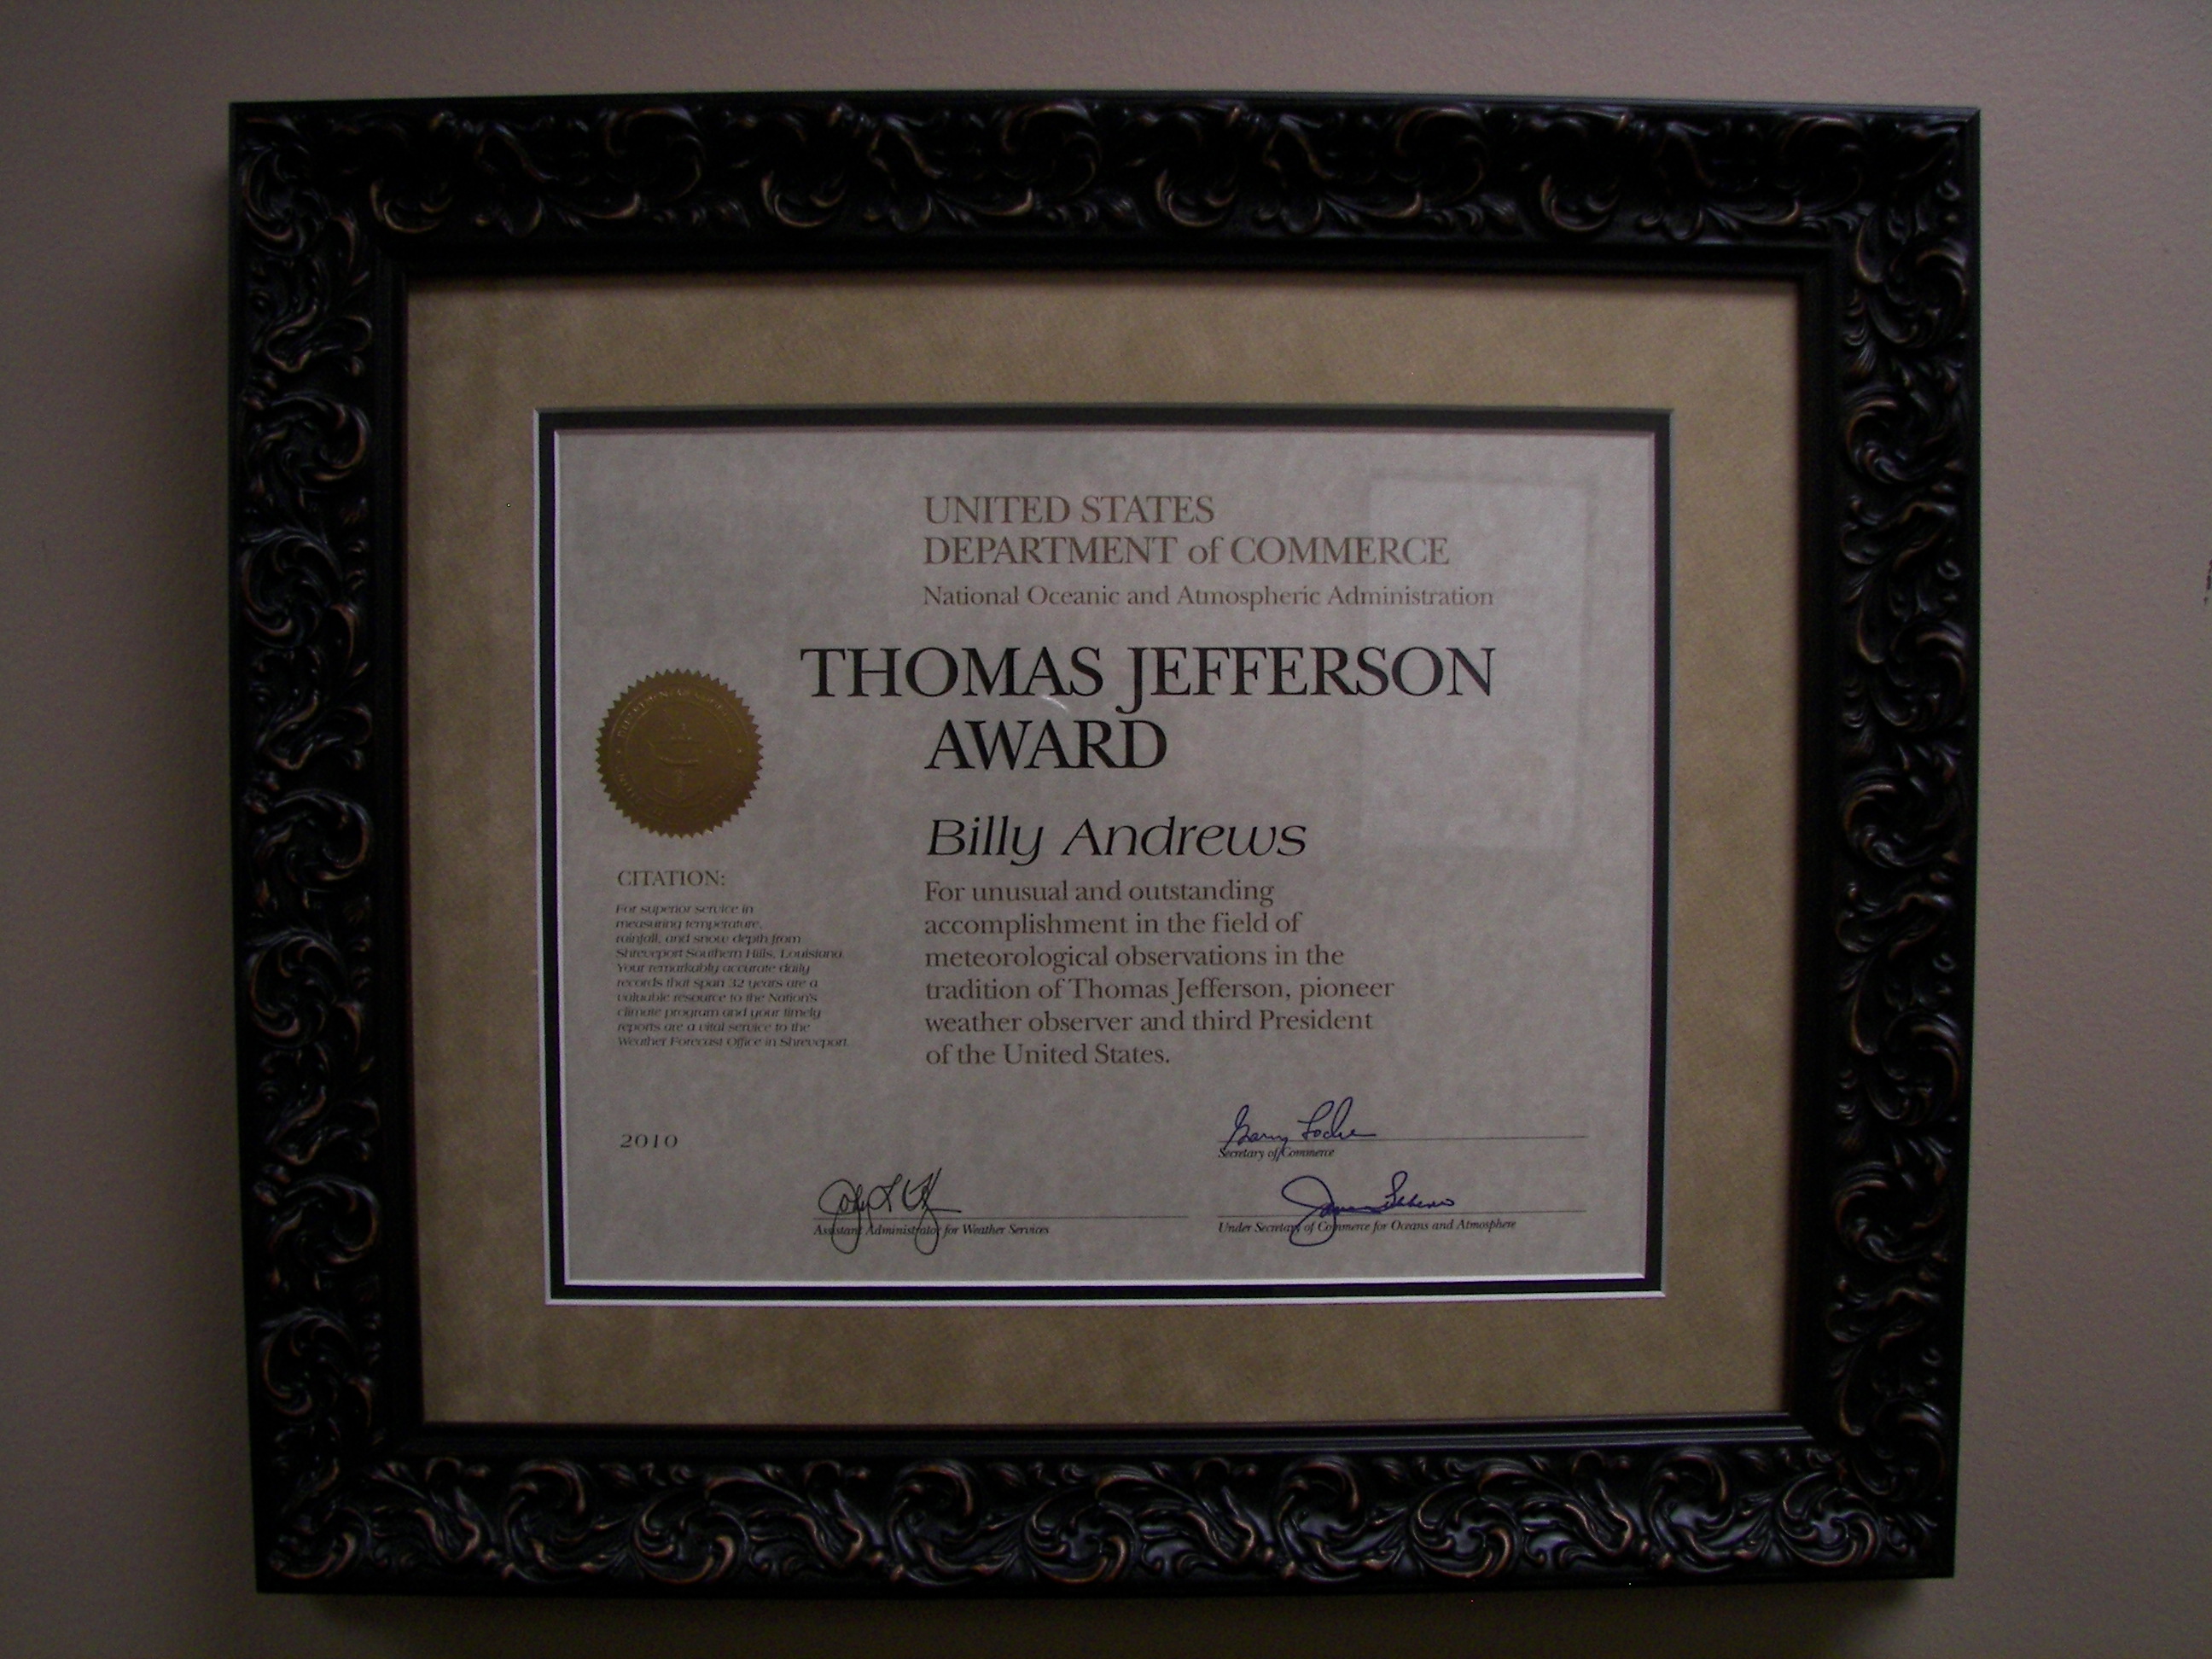 Billy Andrews of Shreveport, LA, received the Thomas Jefferson Award in 2010